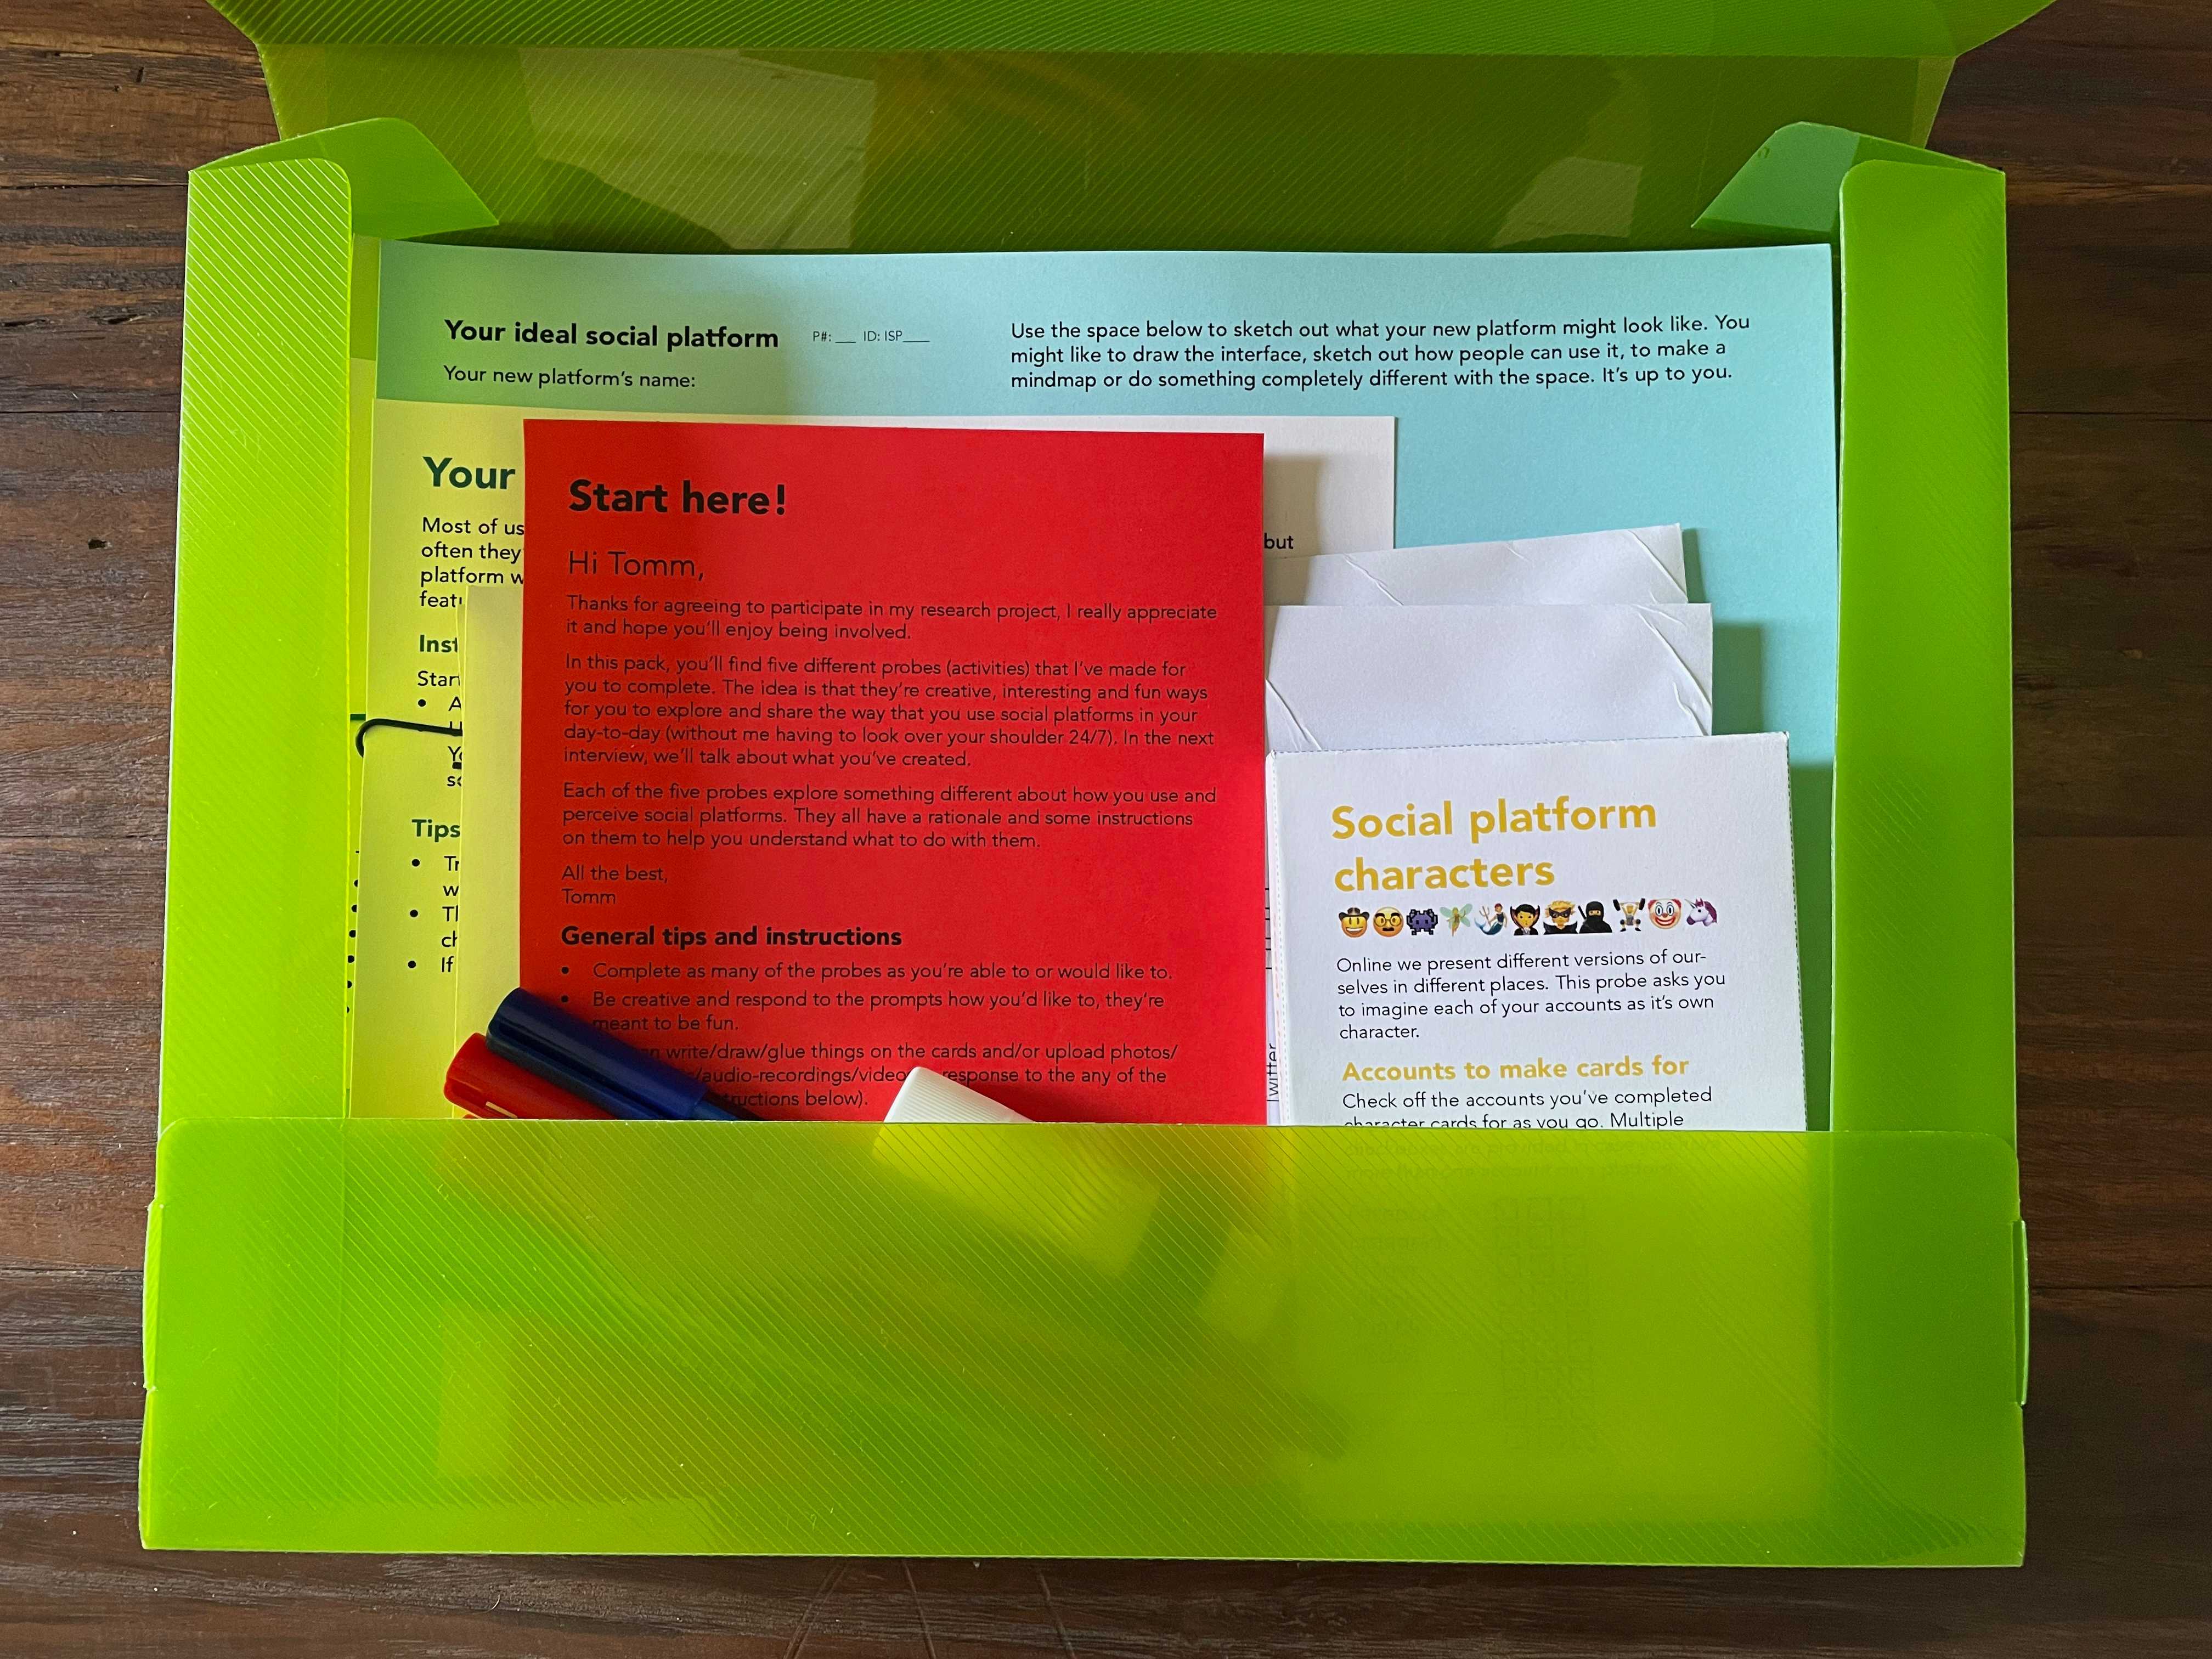 A plastic box full of paper based activities and pens.